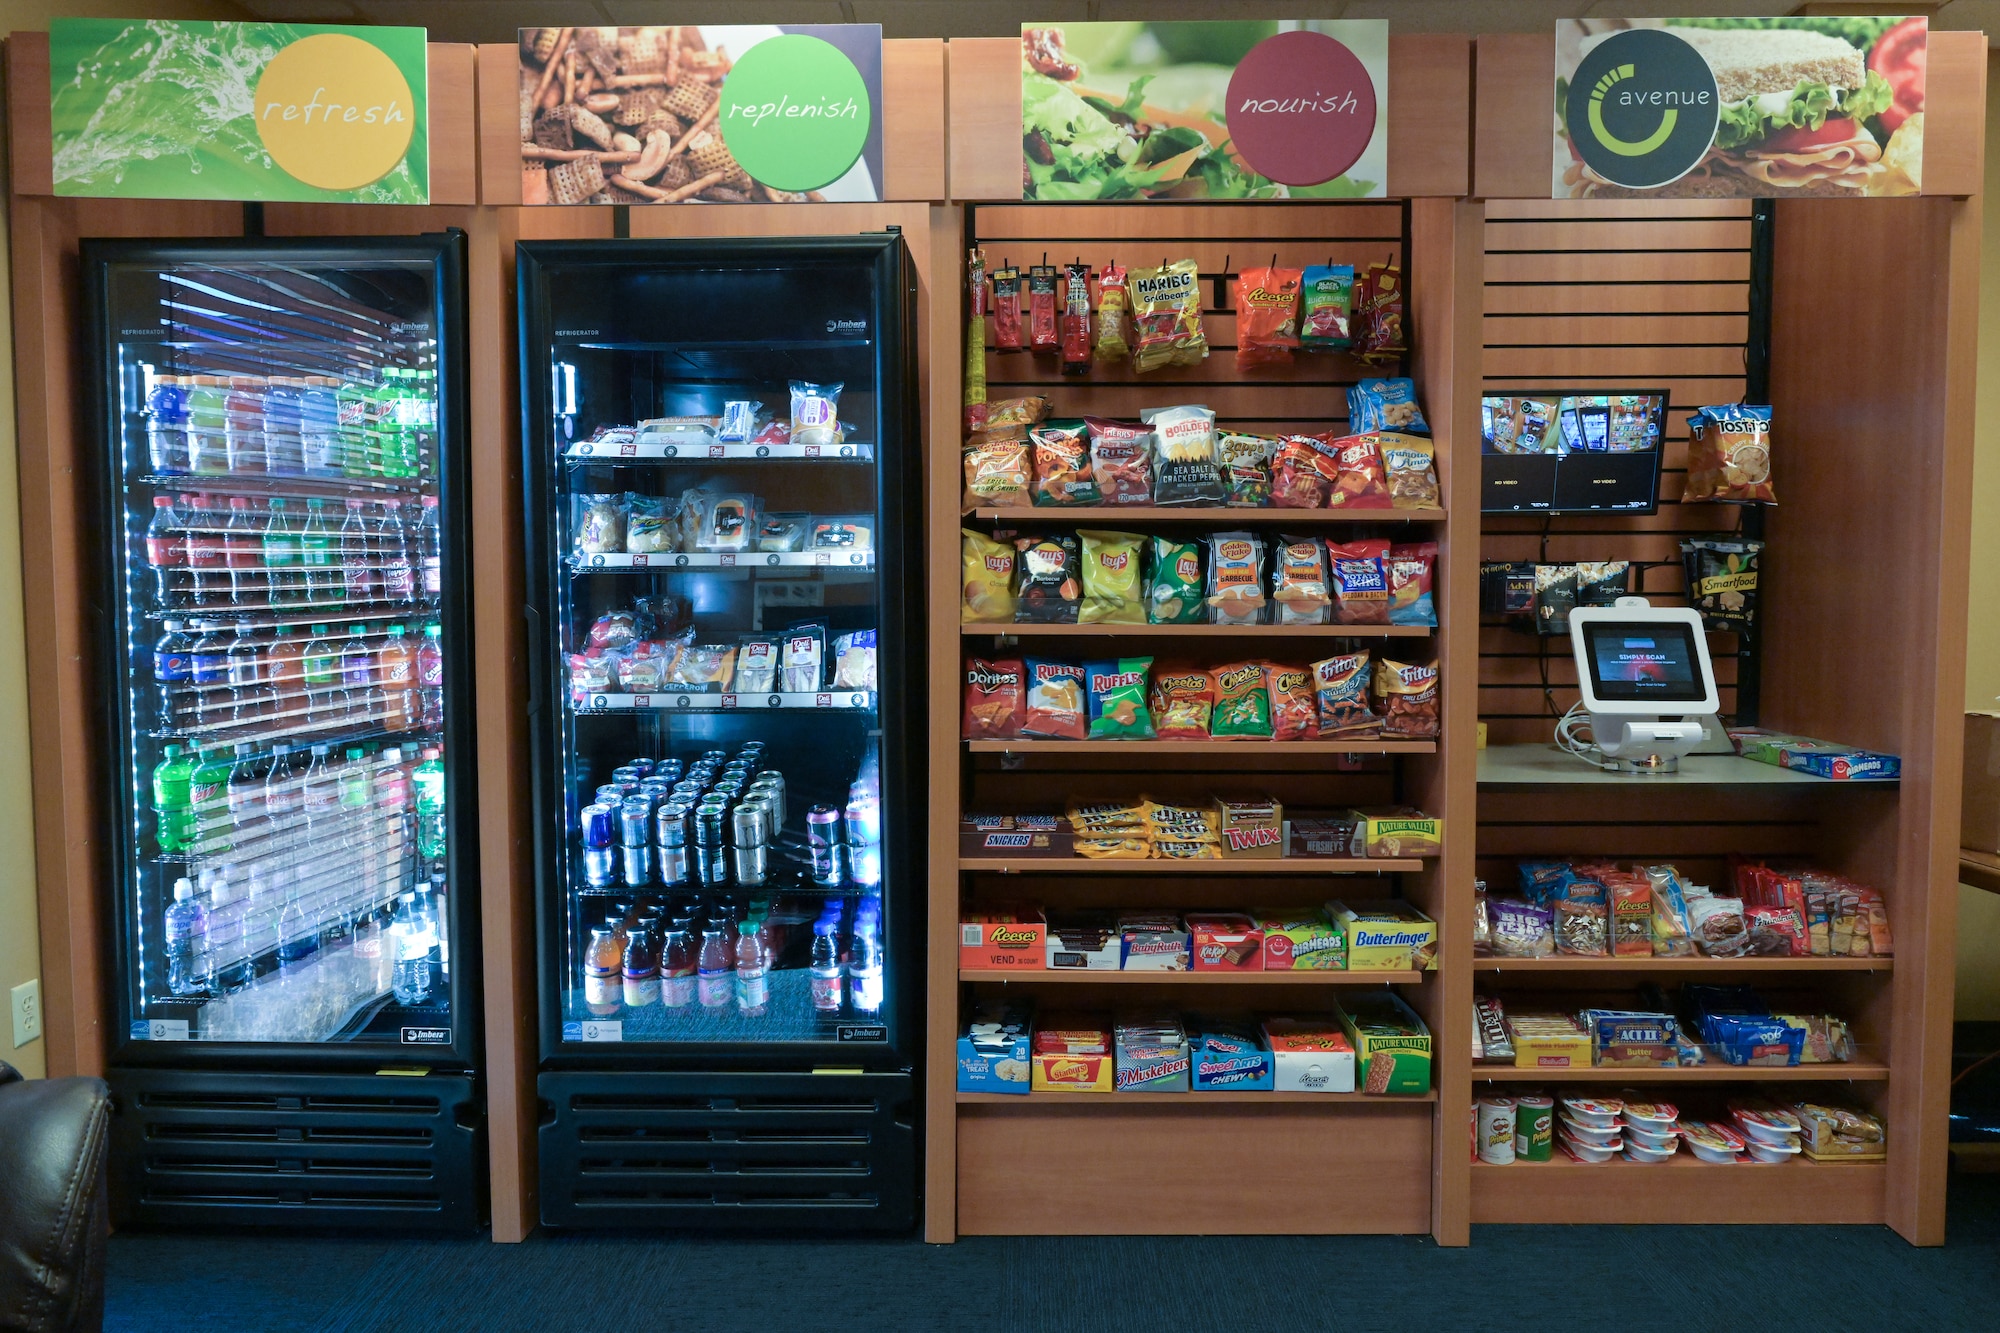 The recently installed Nano market installed in Montgomery Village consist of two refrigerated sections which holds cold drinks and food and two non-refrigerated sections containing dry snacks and microwavable items. The market is completely contactless, meaning airmen can purchase food through the digital payment system and not have to come in contact with other individuals, this provides a simple and safe option for hungry Airmen. (U.S. Air Force photo by Airman 1st Class Jessica Haynie)